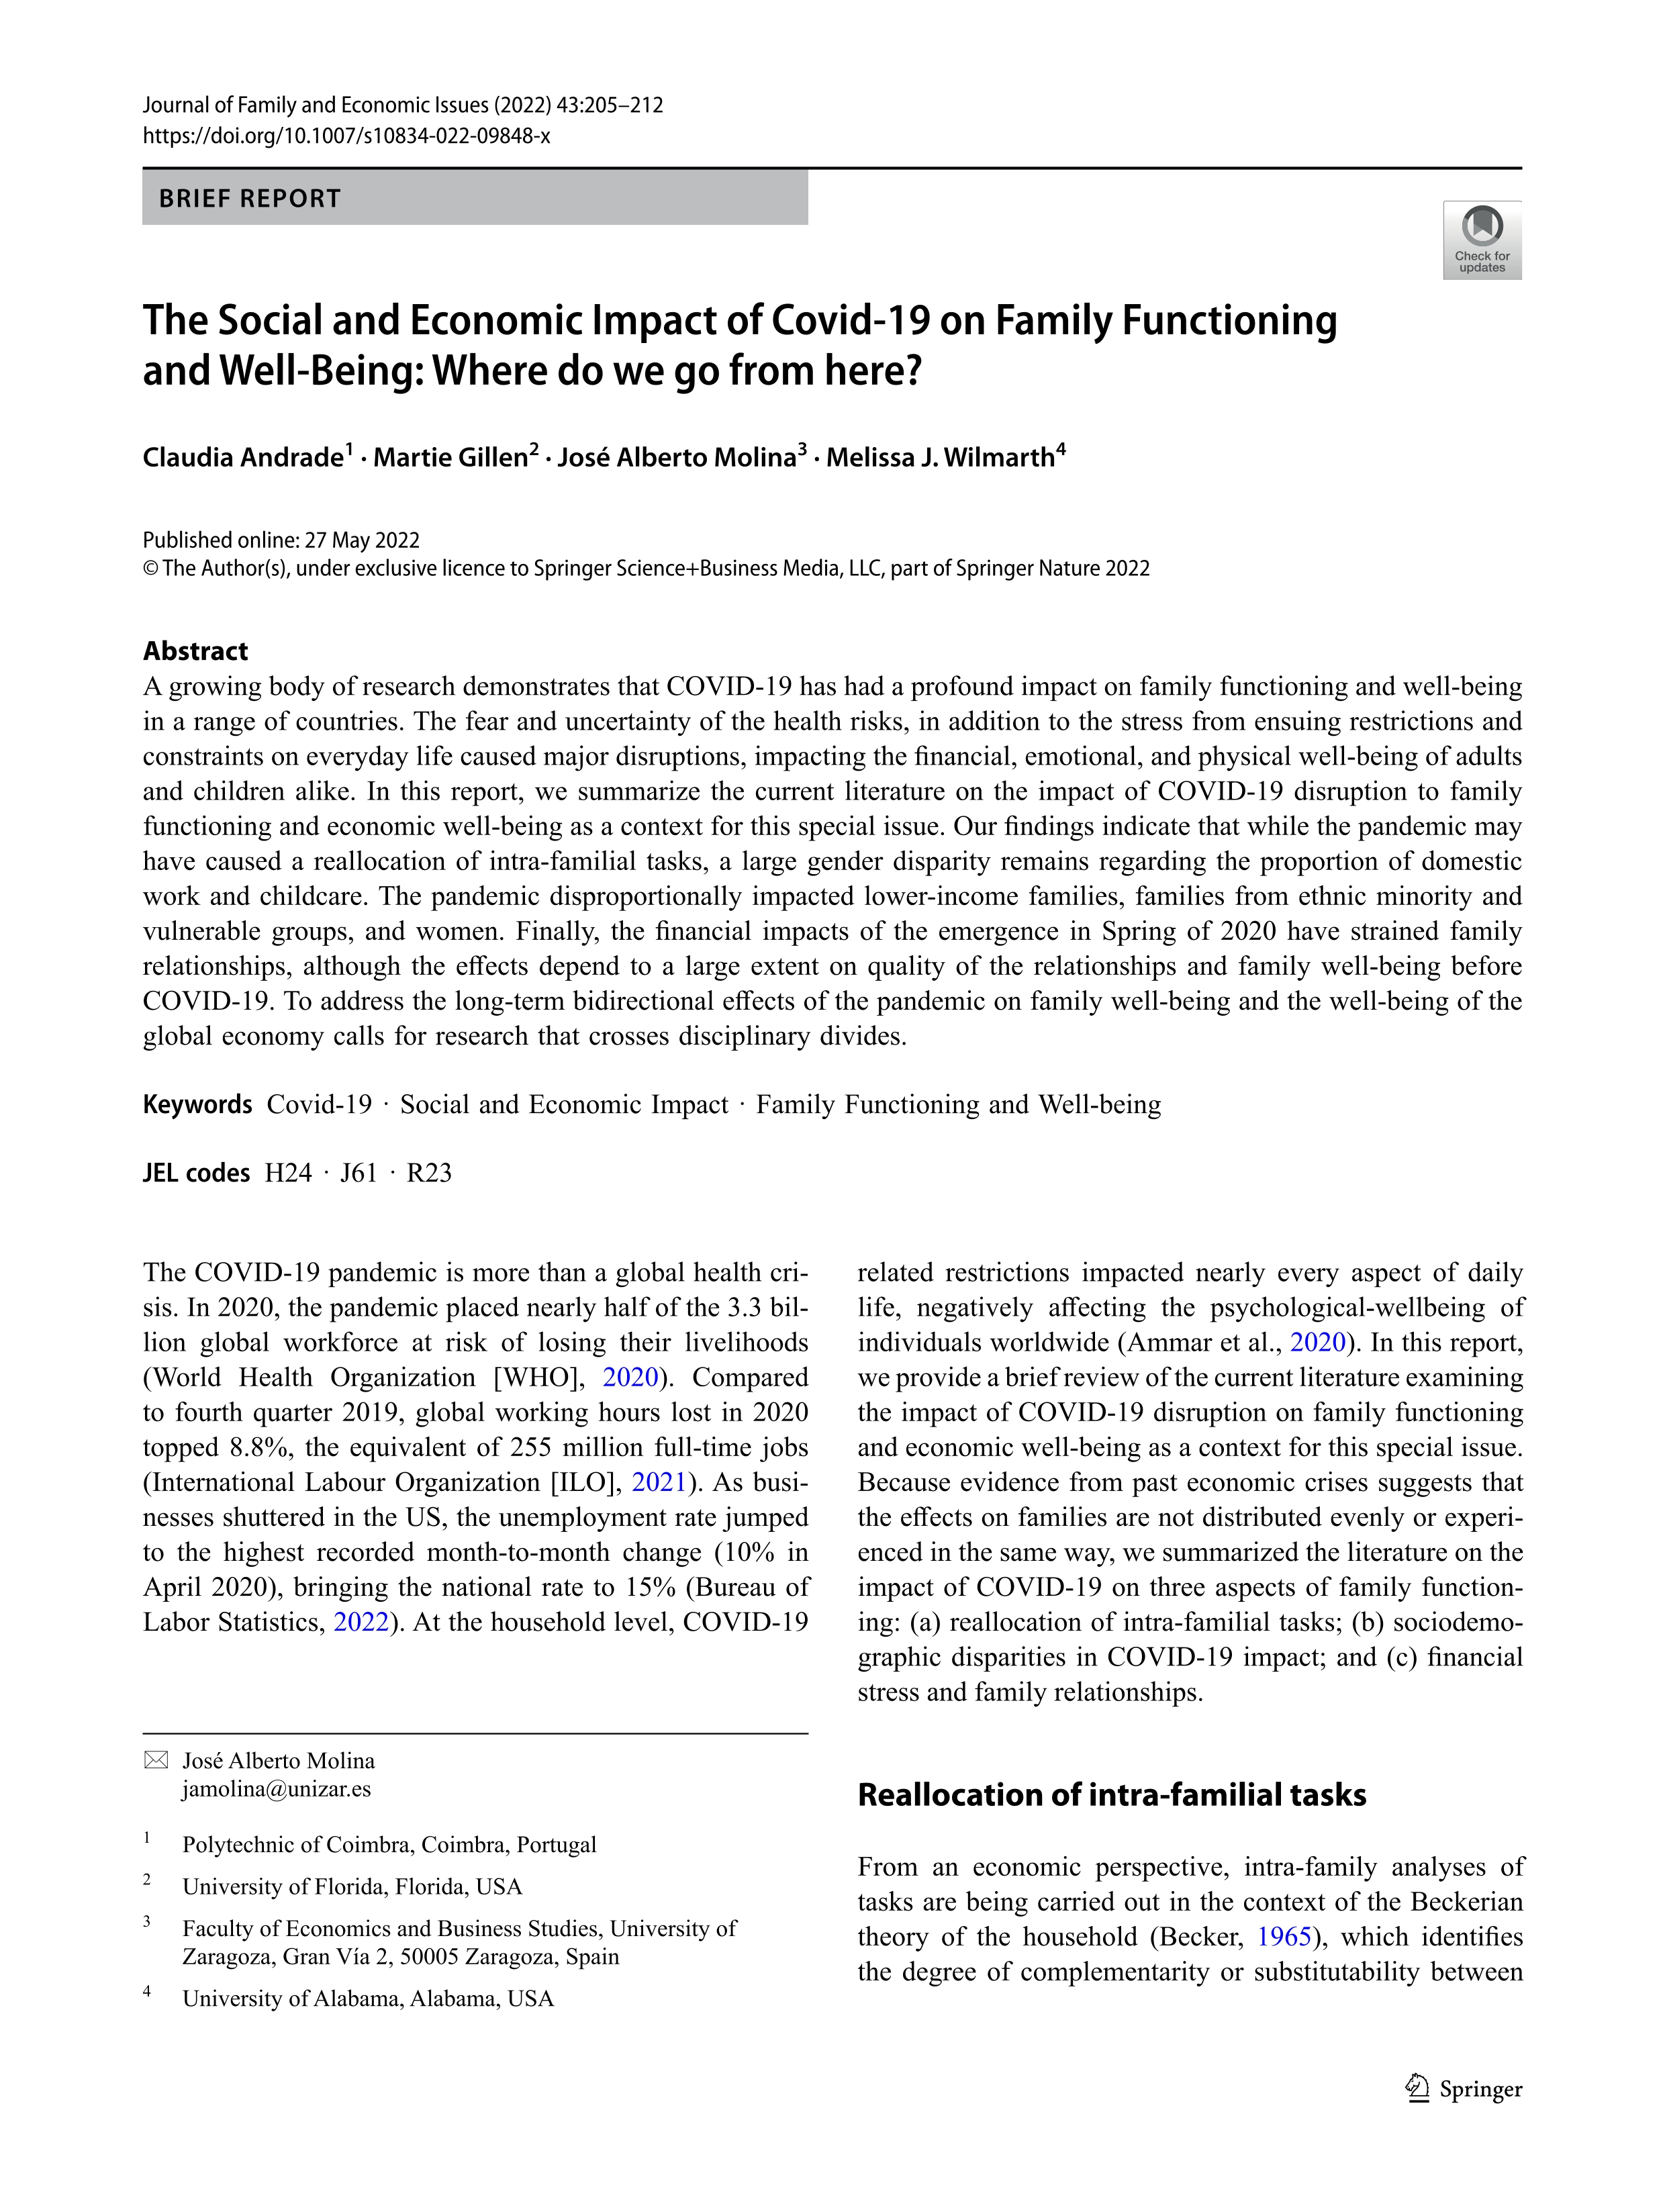 The Social and Economic Impact of Covid-19 on Family Functioning and Well-Being: Where do we go from here?